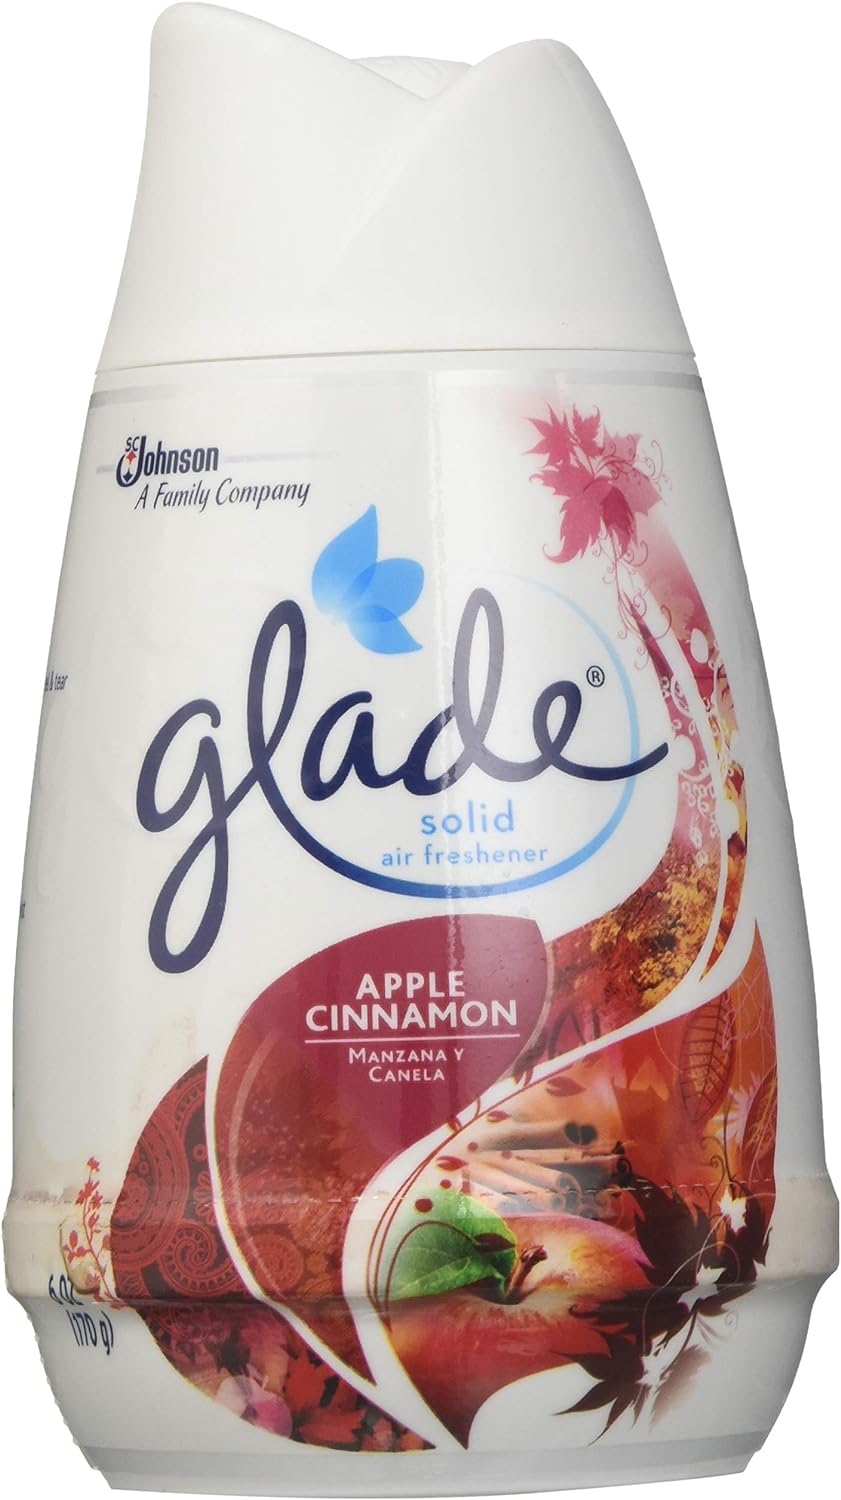 Glade Solid Air Freshener, Apple Cinnamon, 6 Ounce (12 Pack Special)